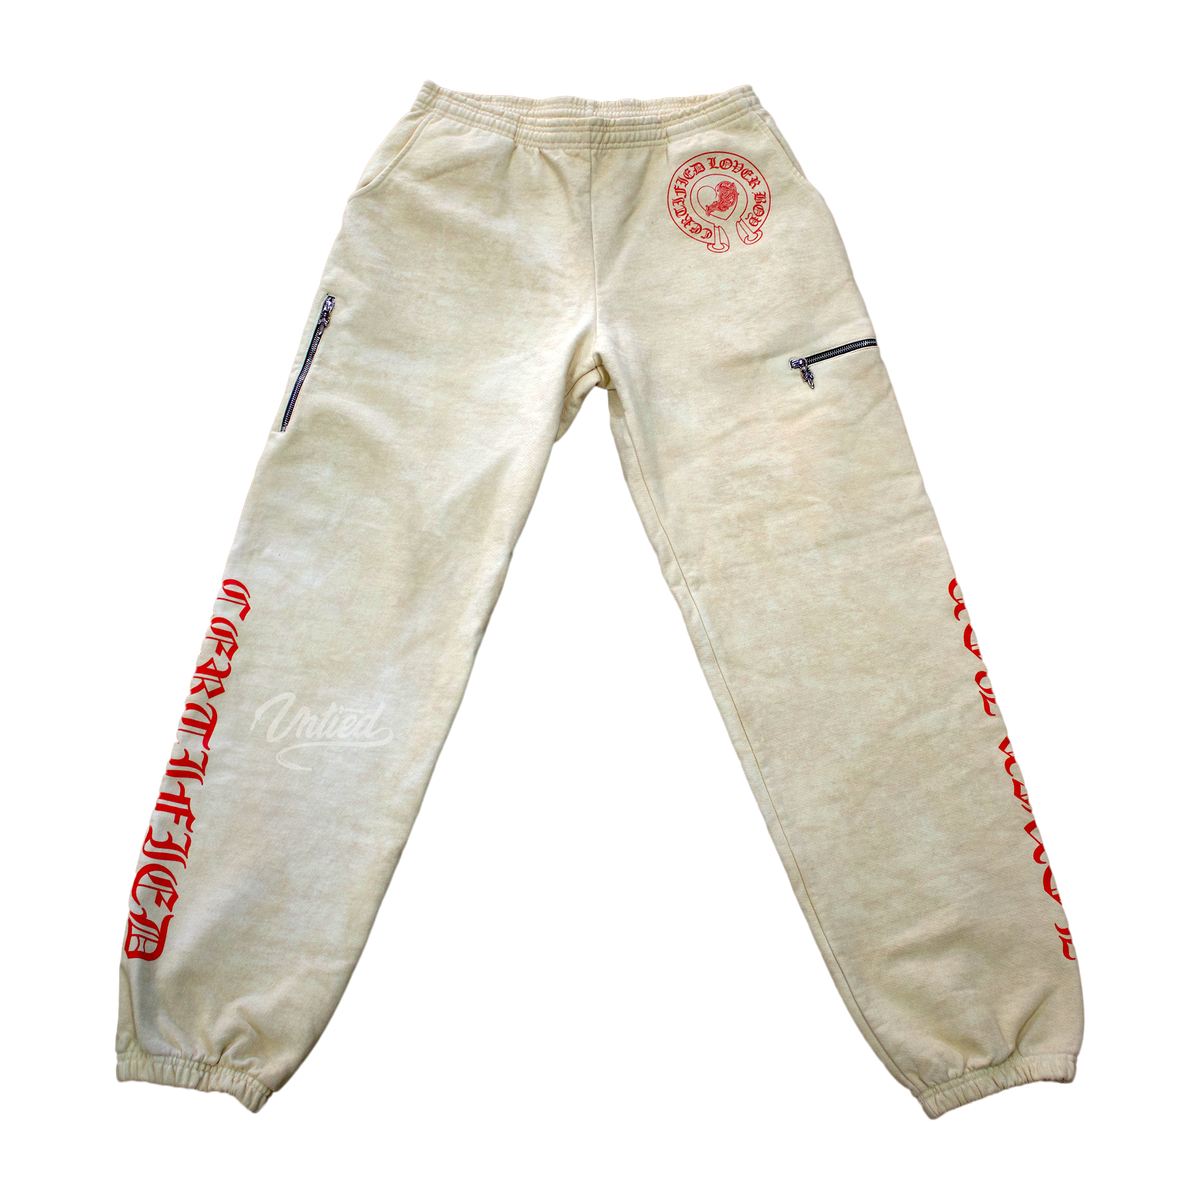 Chrome Hearts CLB Drake Friends and Family F&F Sweatpants "Tan"